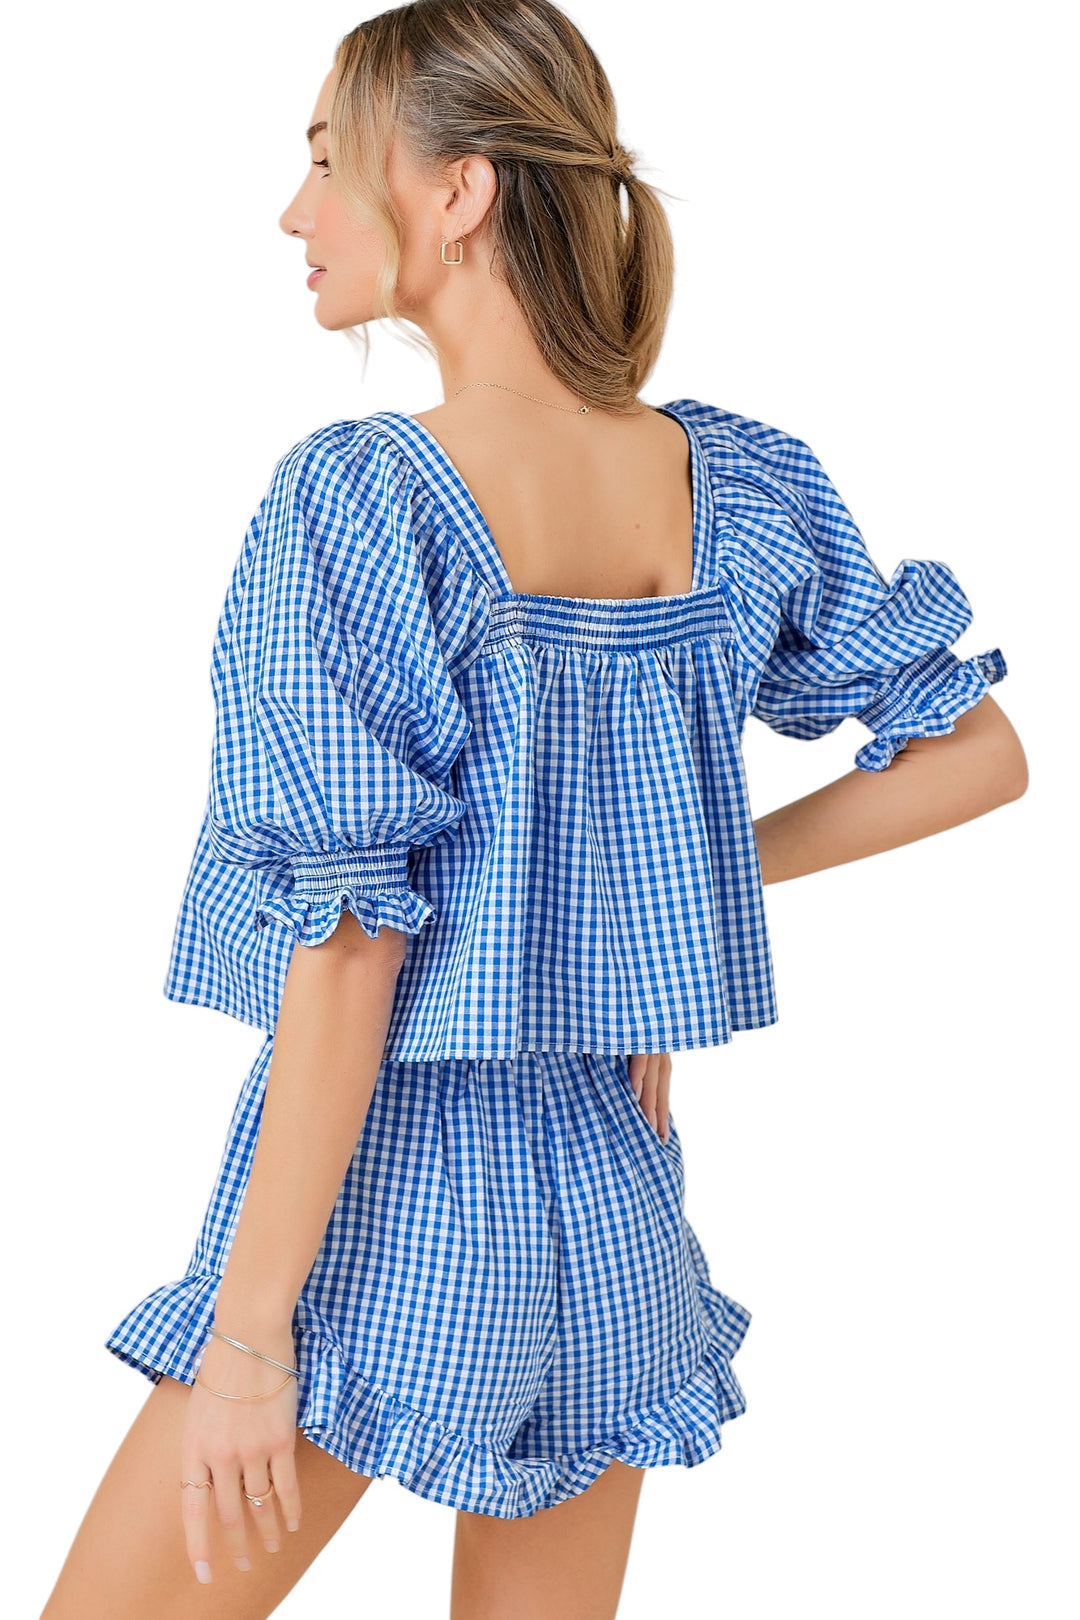 Cannon Ruffle Gingham Top